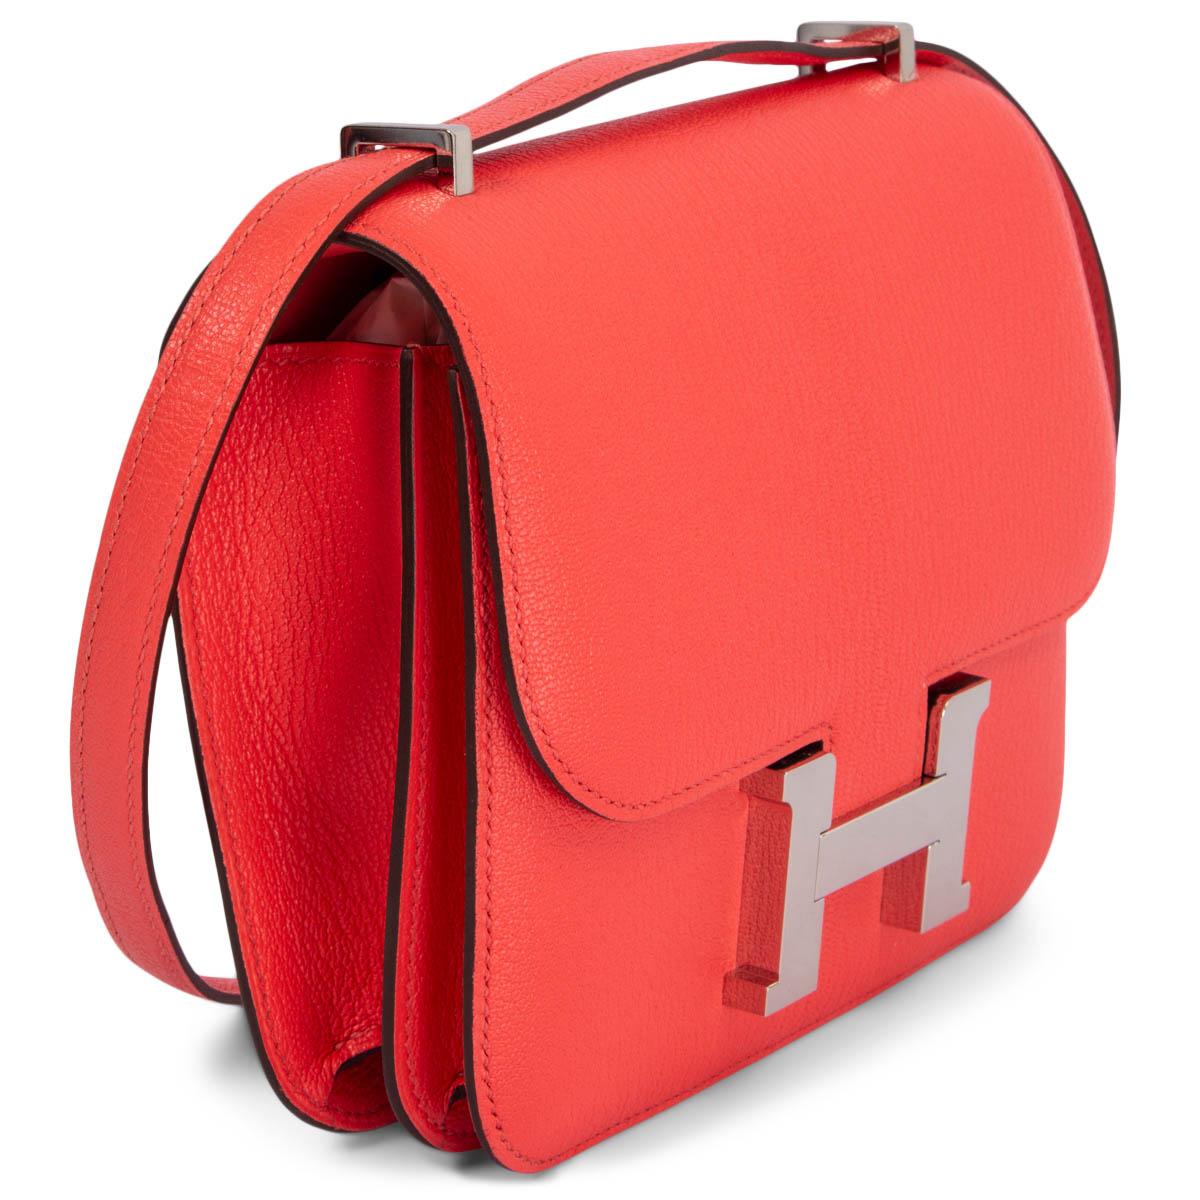 100% authentic Hermès Constance 18 mini shoulder bag in Jaipur Chèvre Mysore leather. Palladium H-Buckle closure. Lined in Veau Swift leather. Inside is divided into two compartments with an open pocket against the front and back. Has been carried